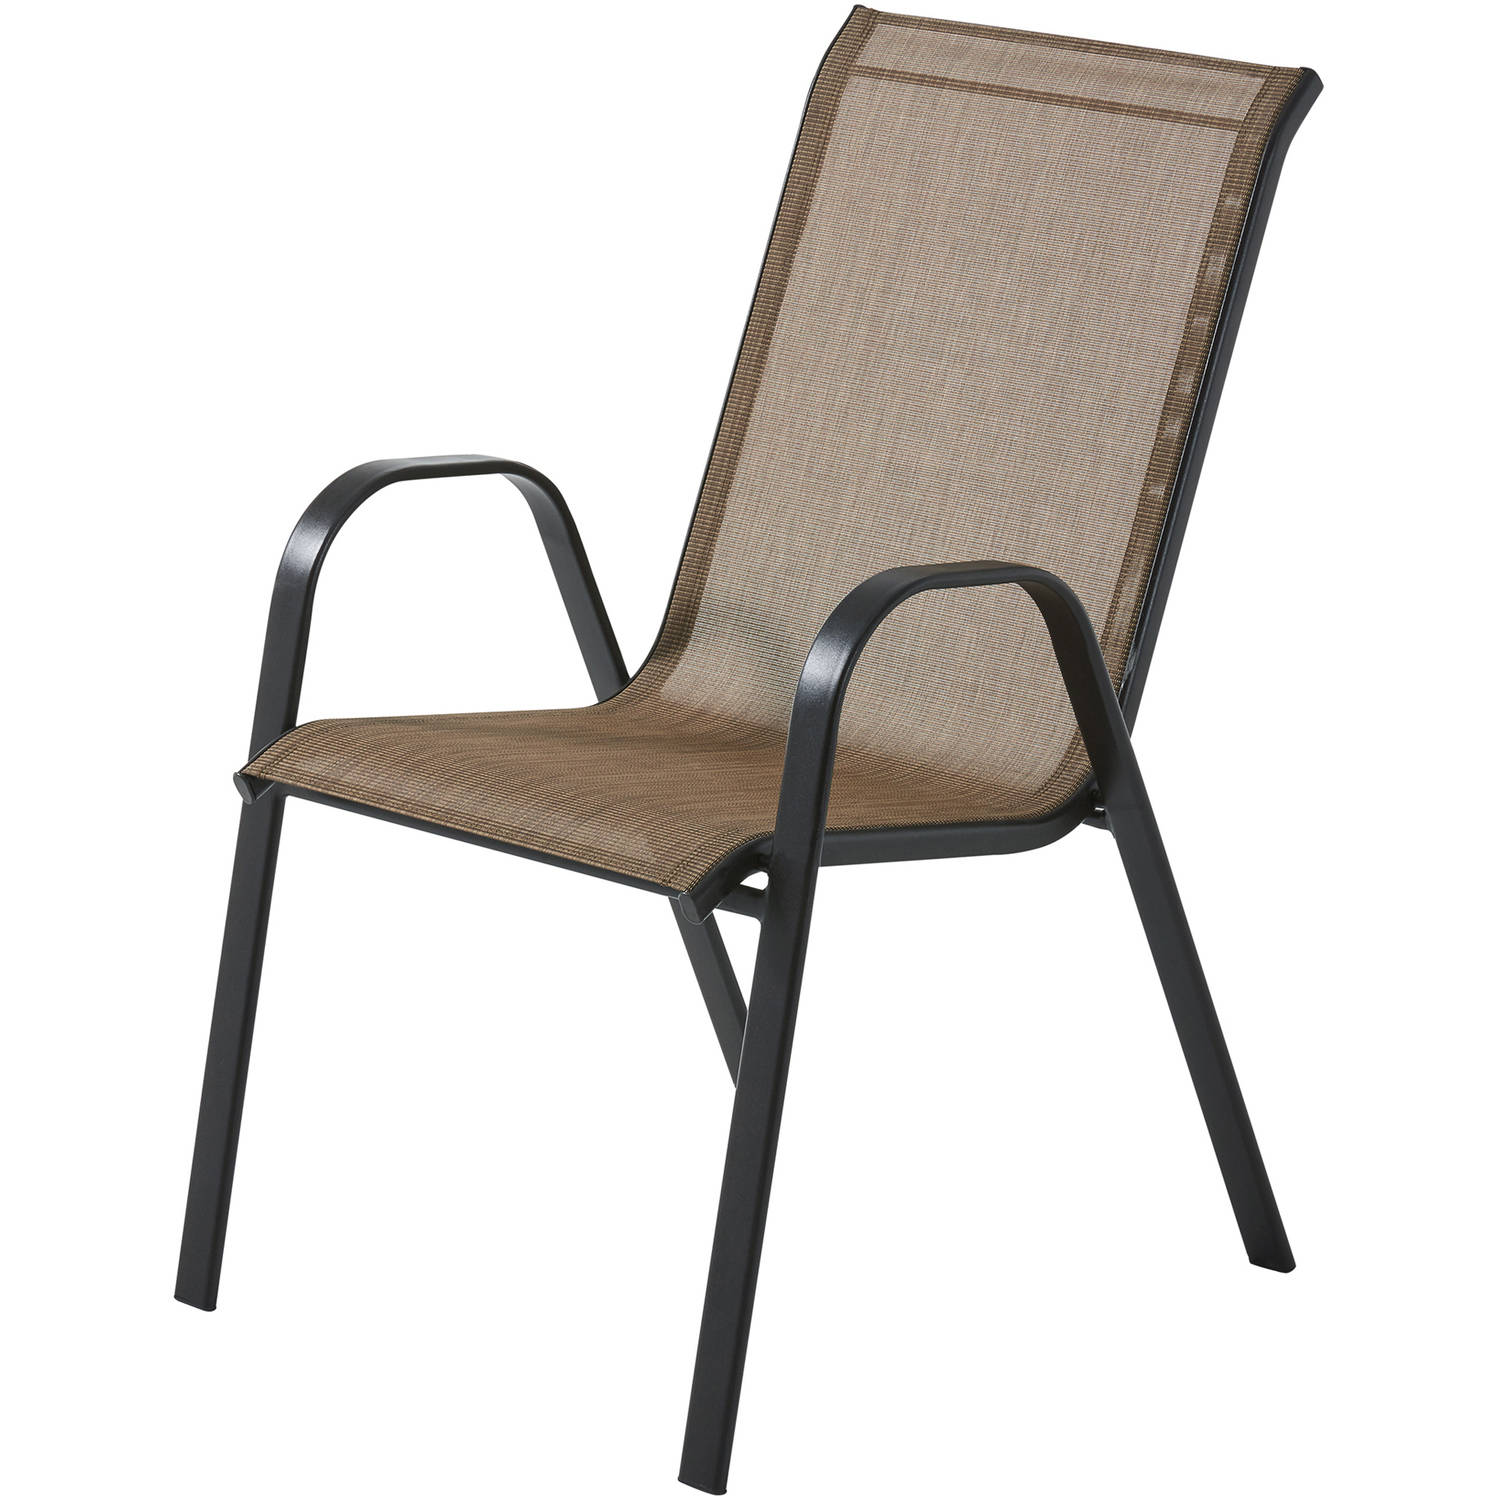 Mainstays Heritage Park Outdoor Patio Stacking Sling Chair, Tan - image 2 of 5